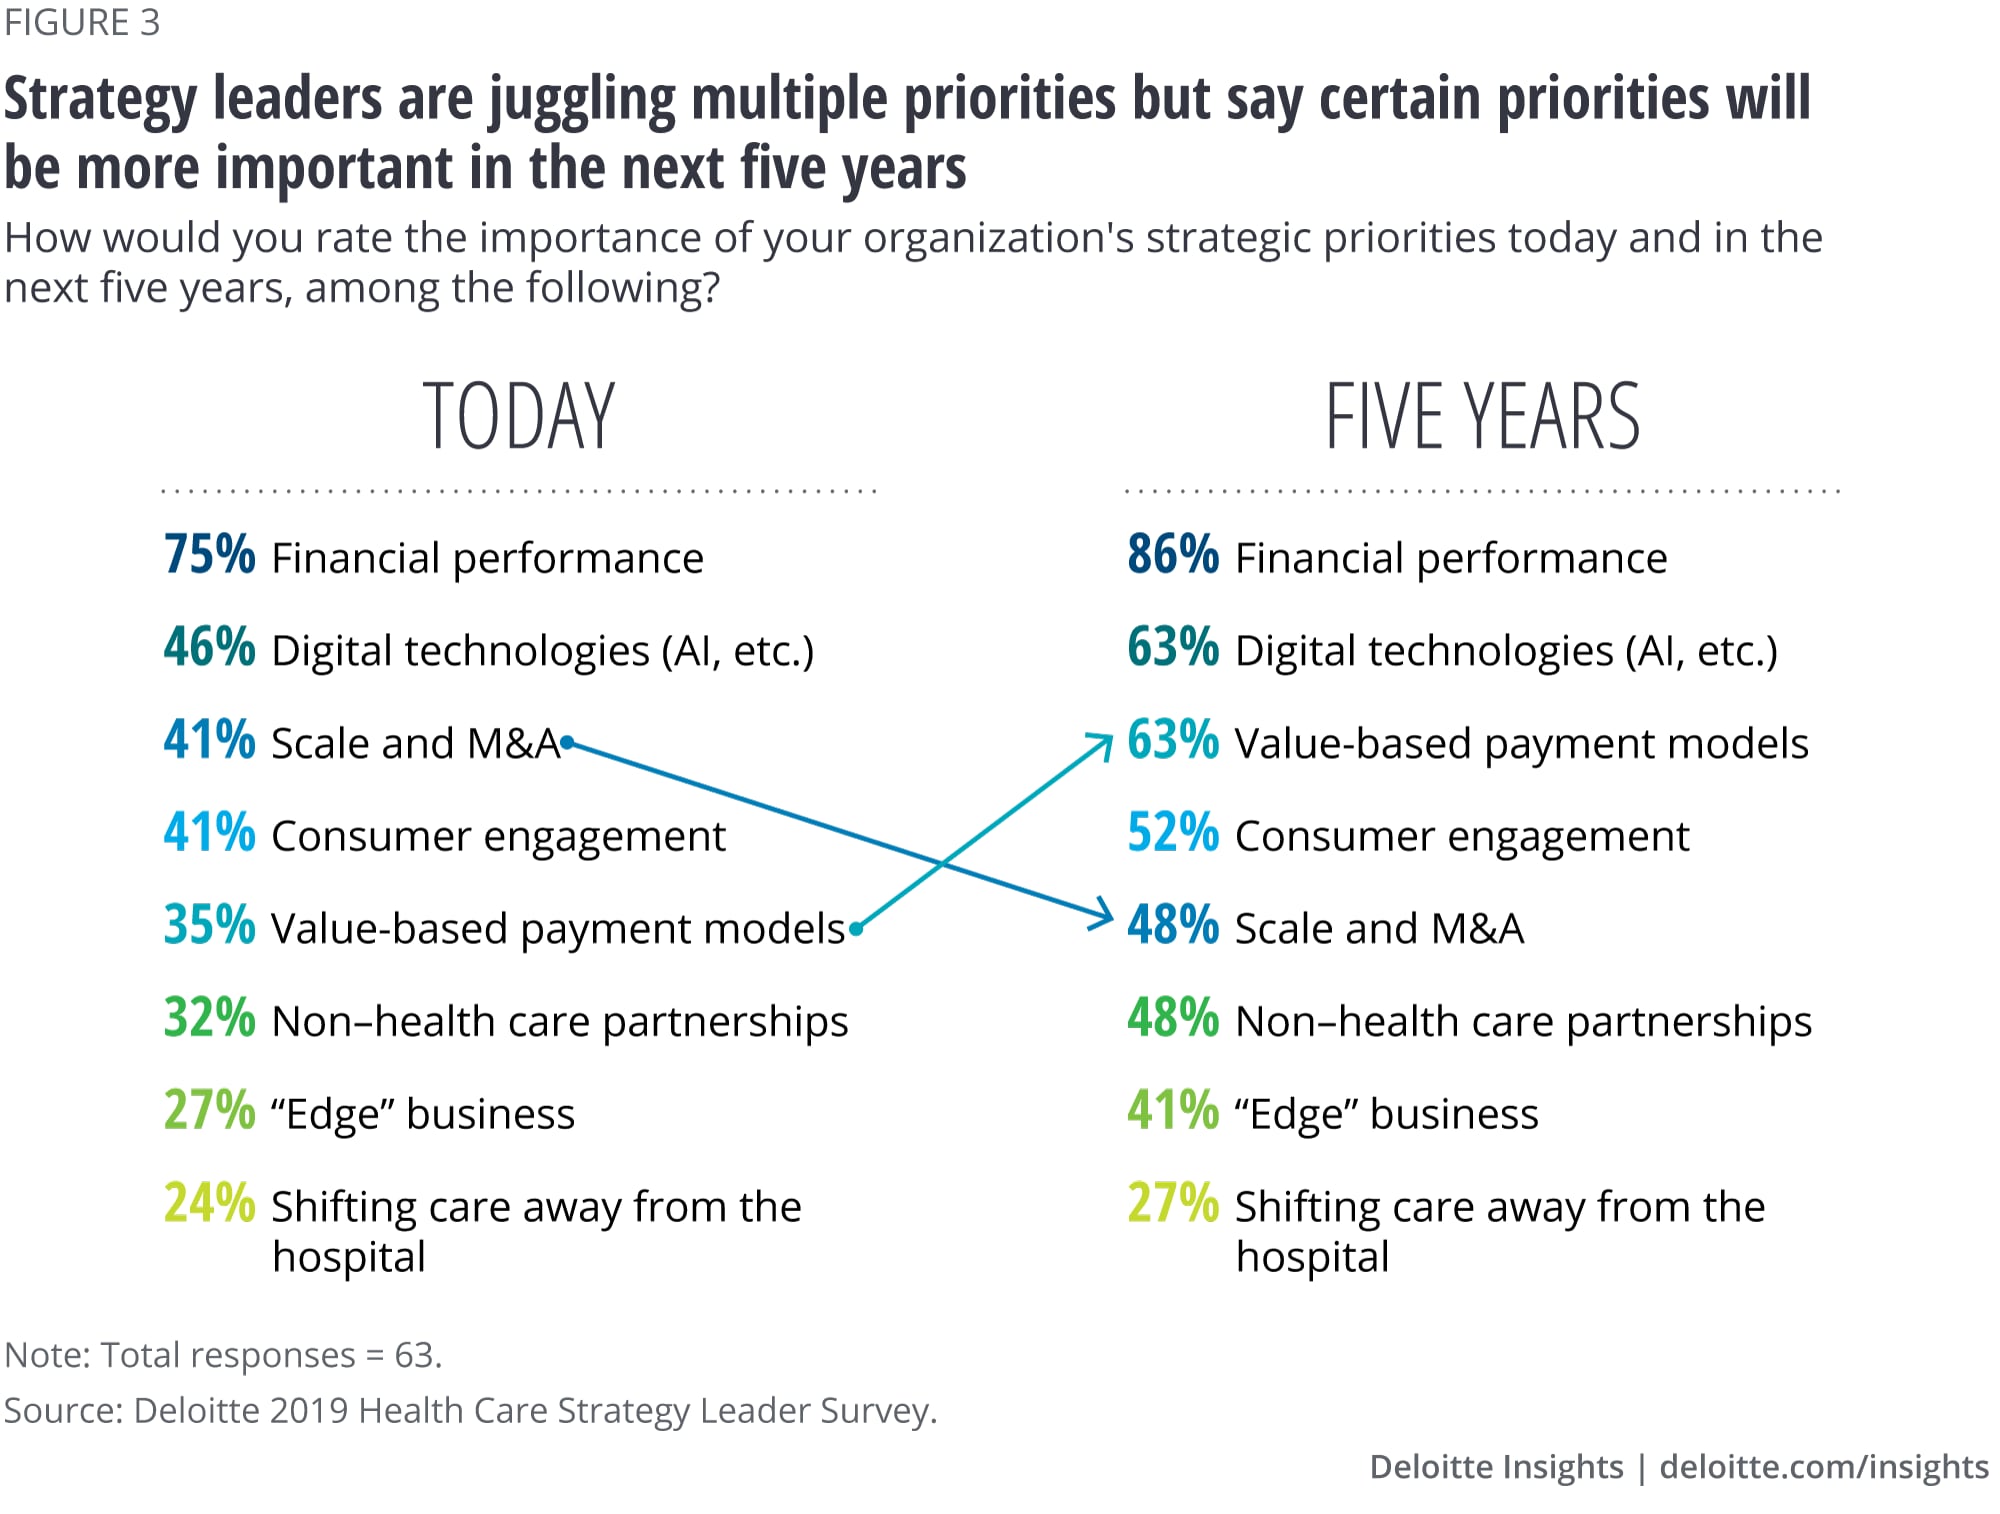 Strategy leaders are juggling multiple priorities but say overall performance will be the top priority for the next five years